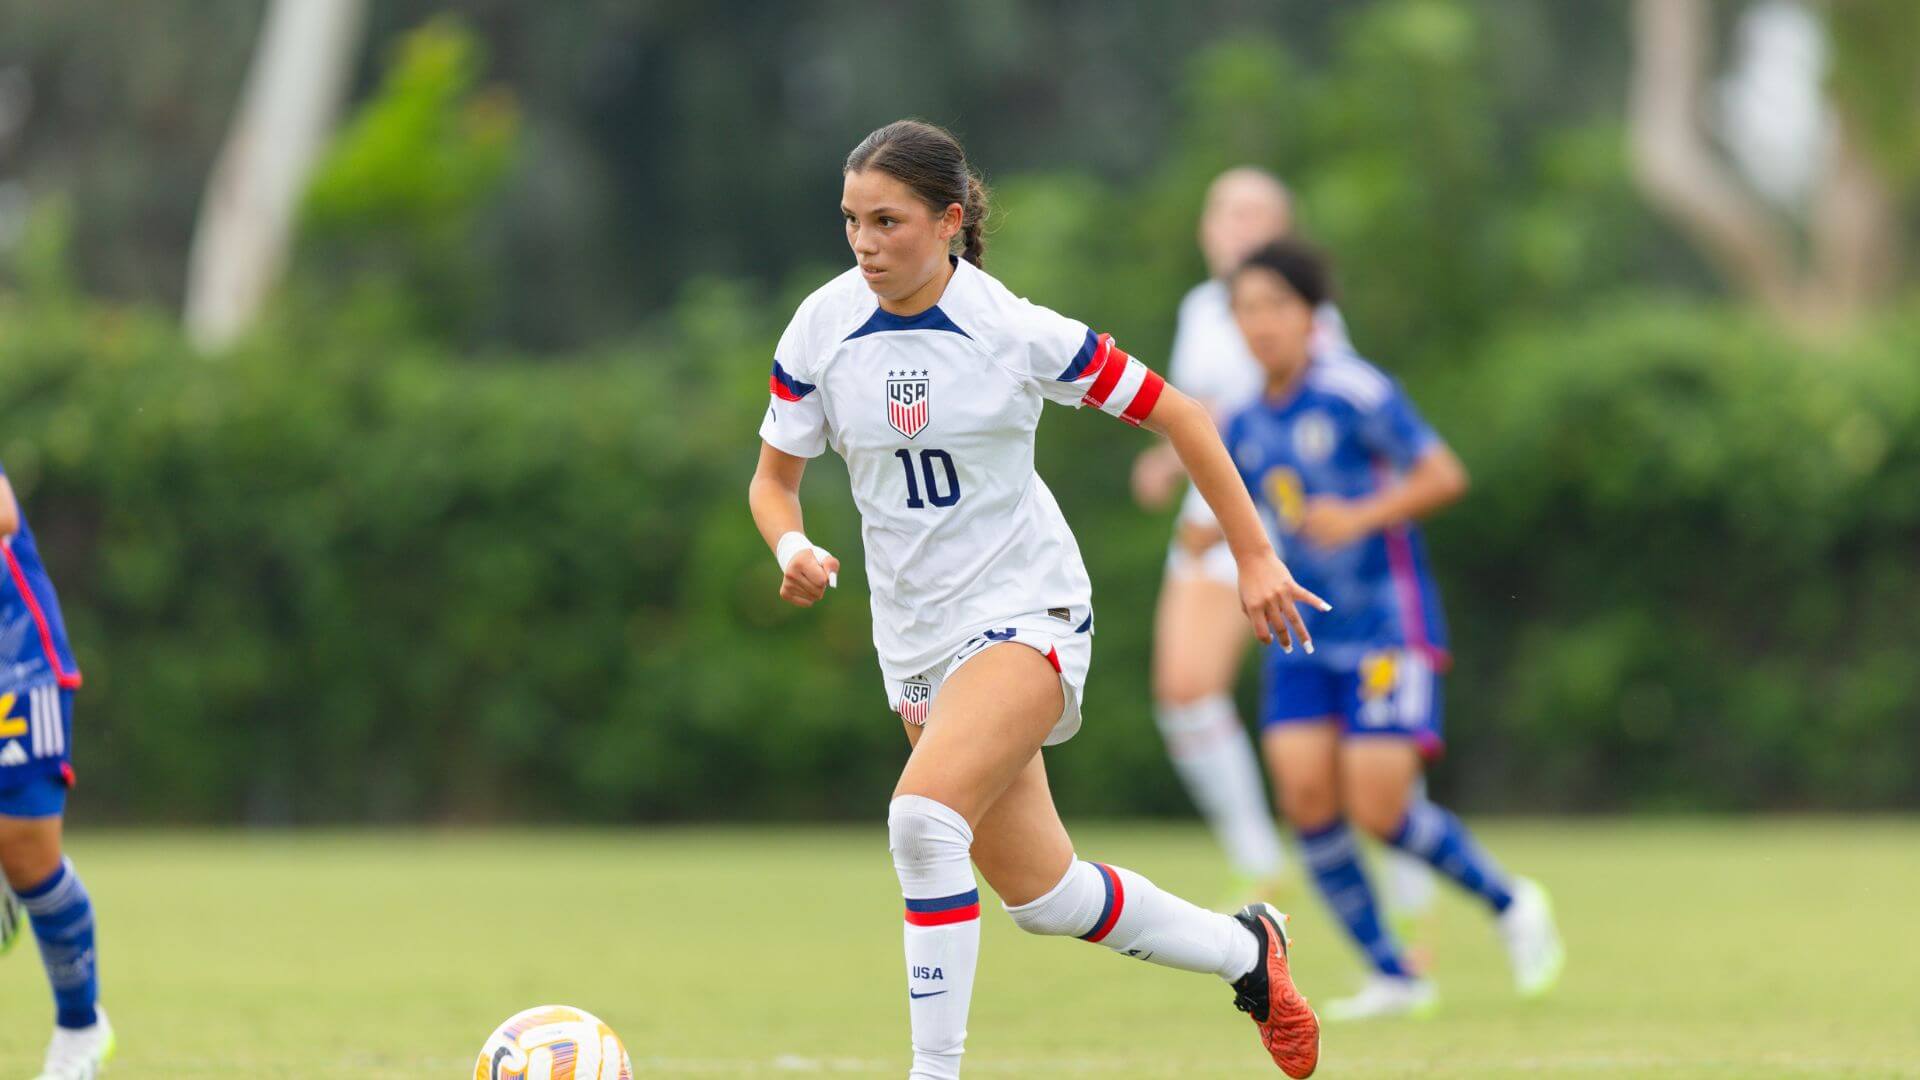 Melanie Barcenas is one of the top young players to watch this year